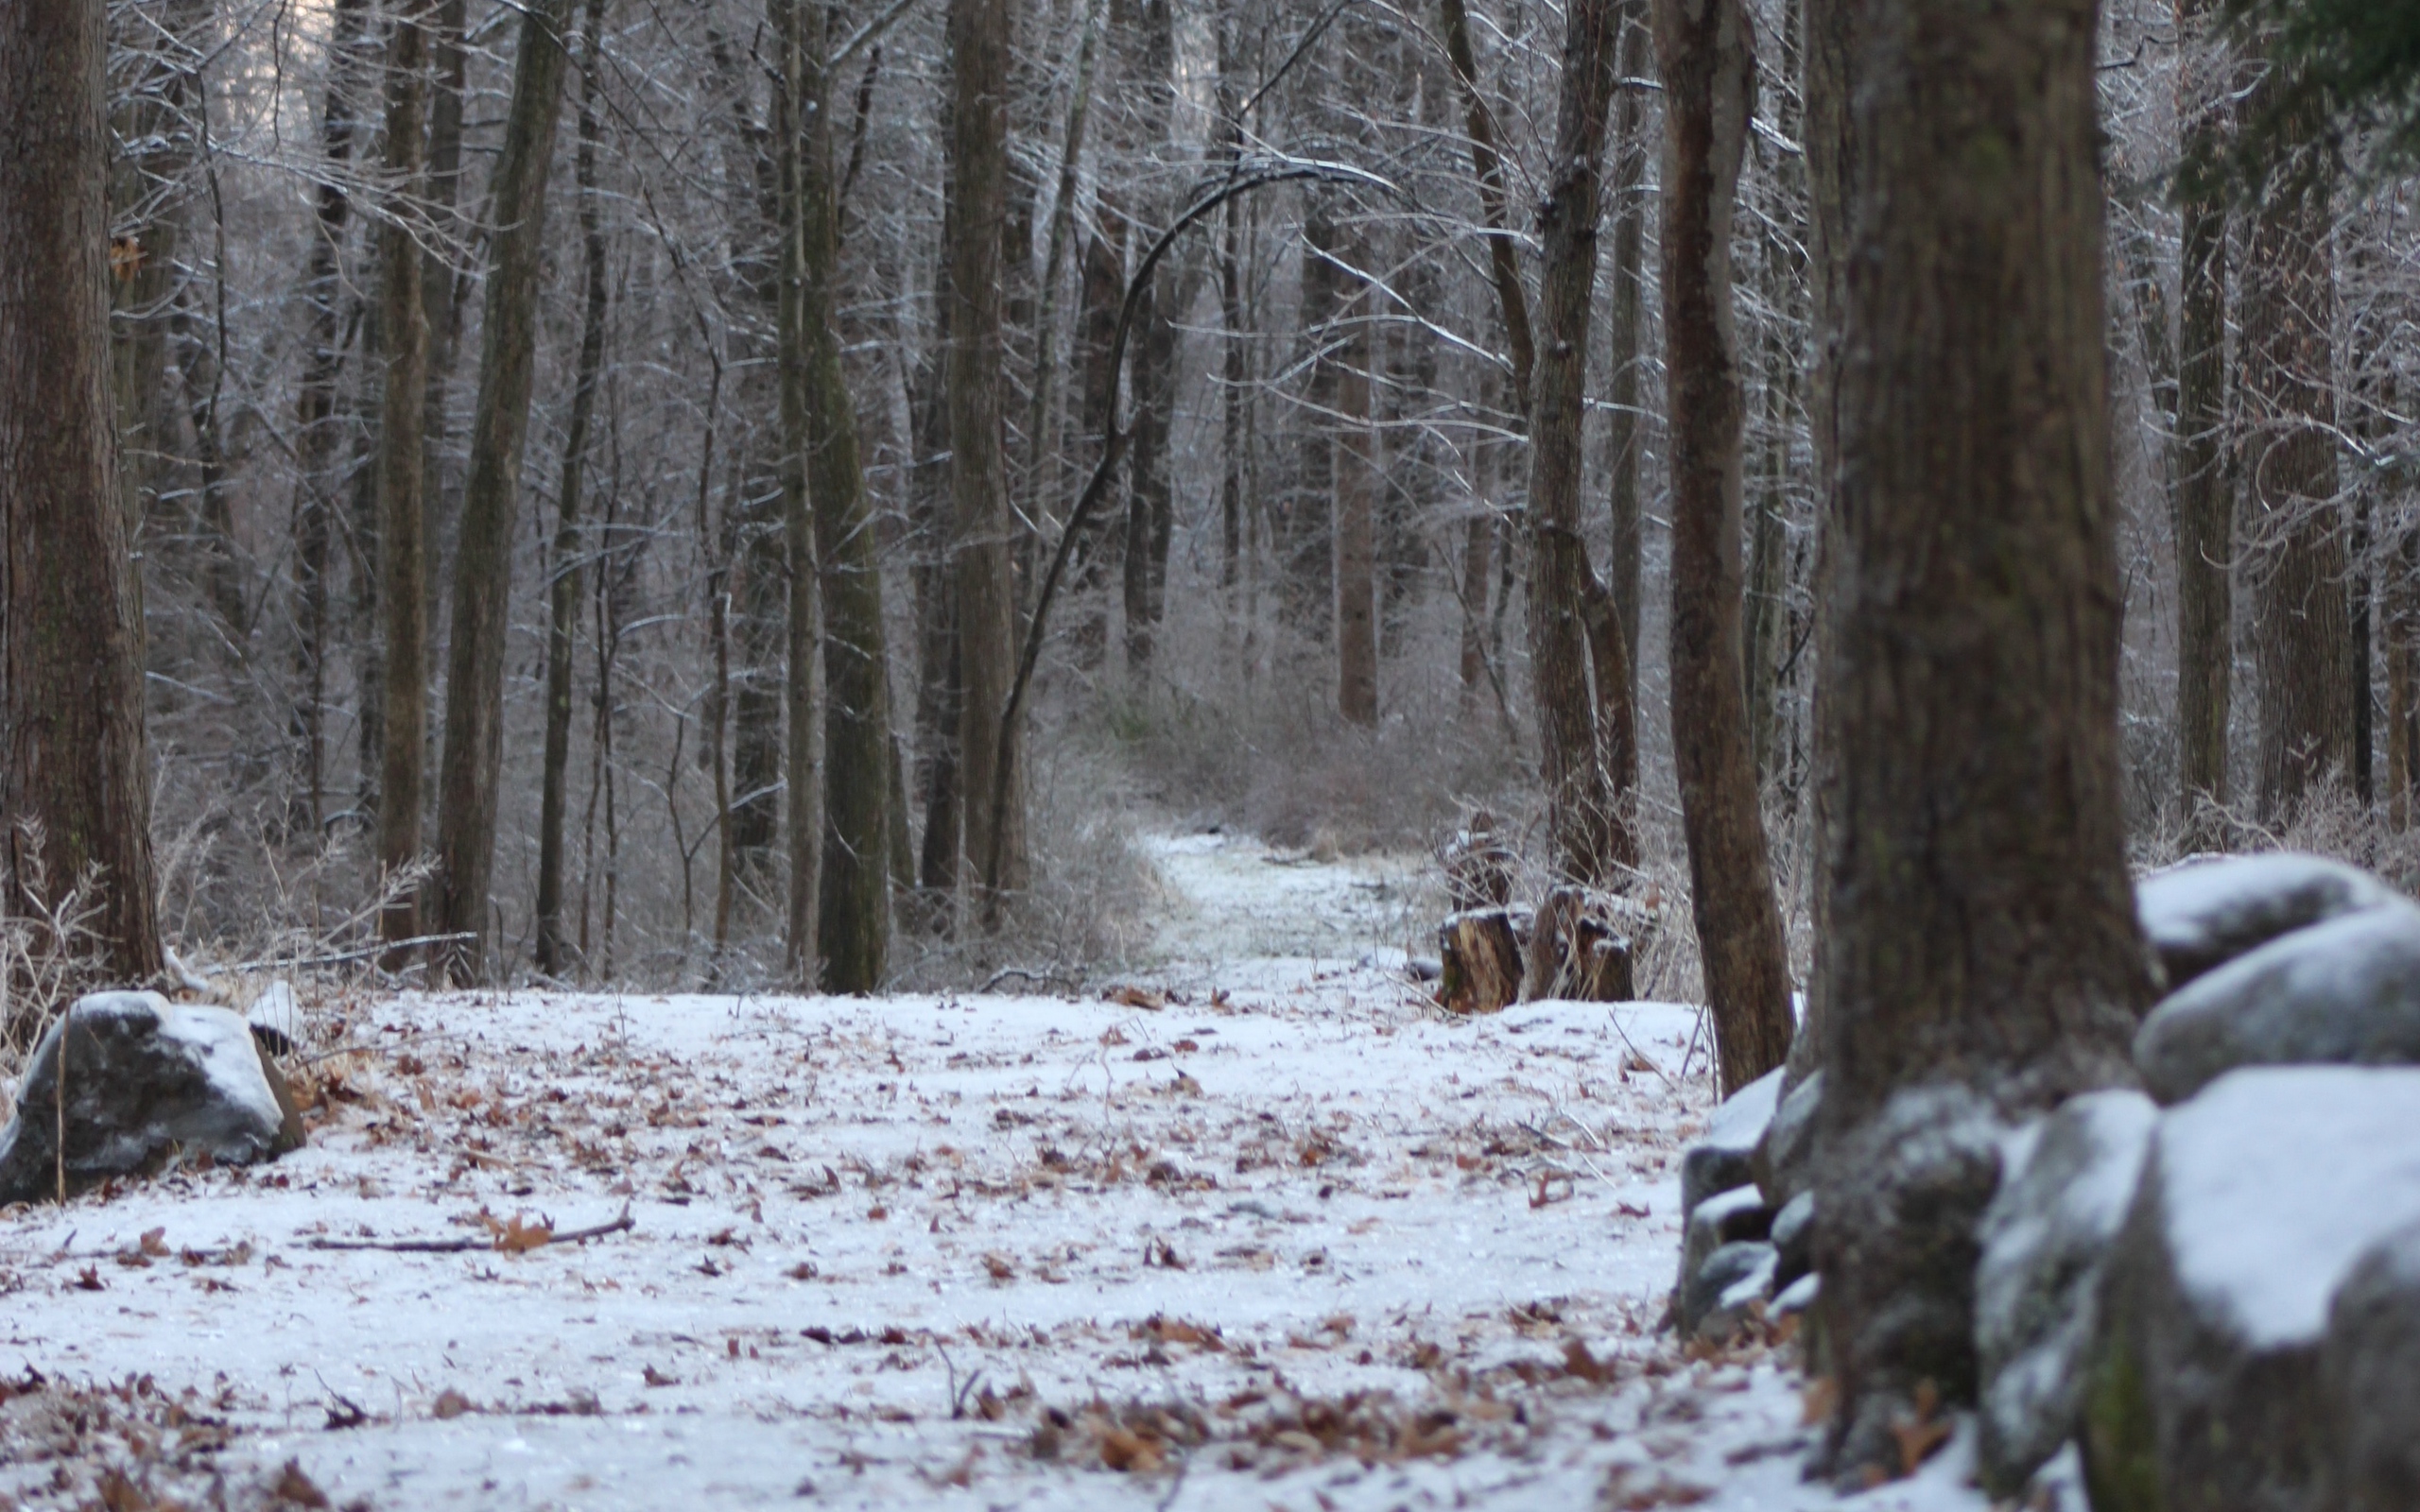 Download wallpaper 2560x1600 forest, path, snow, winter, nature